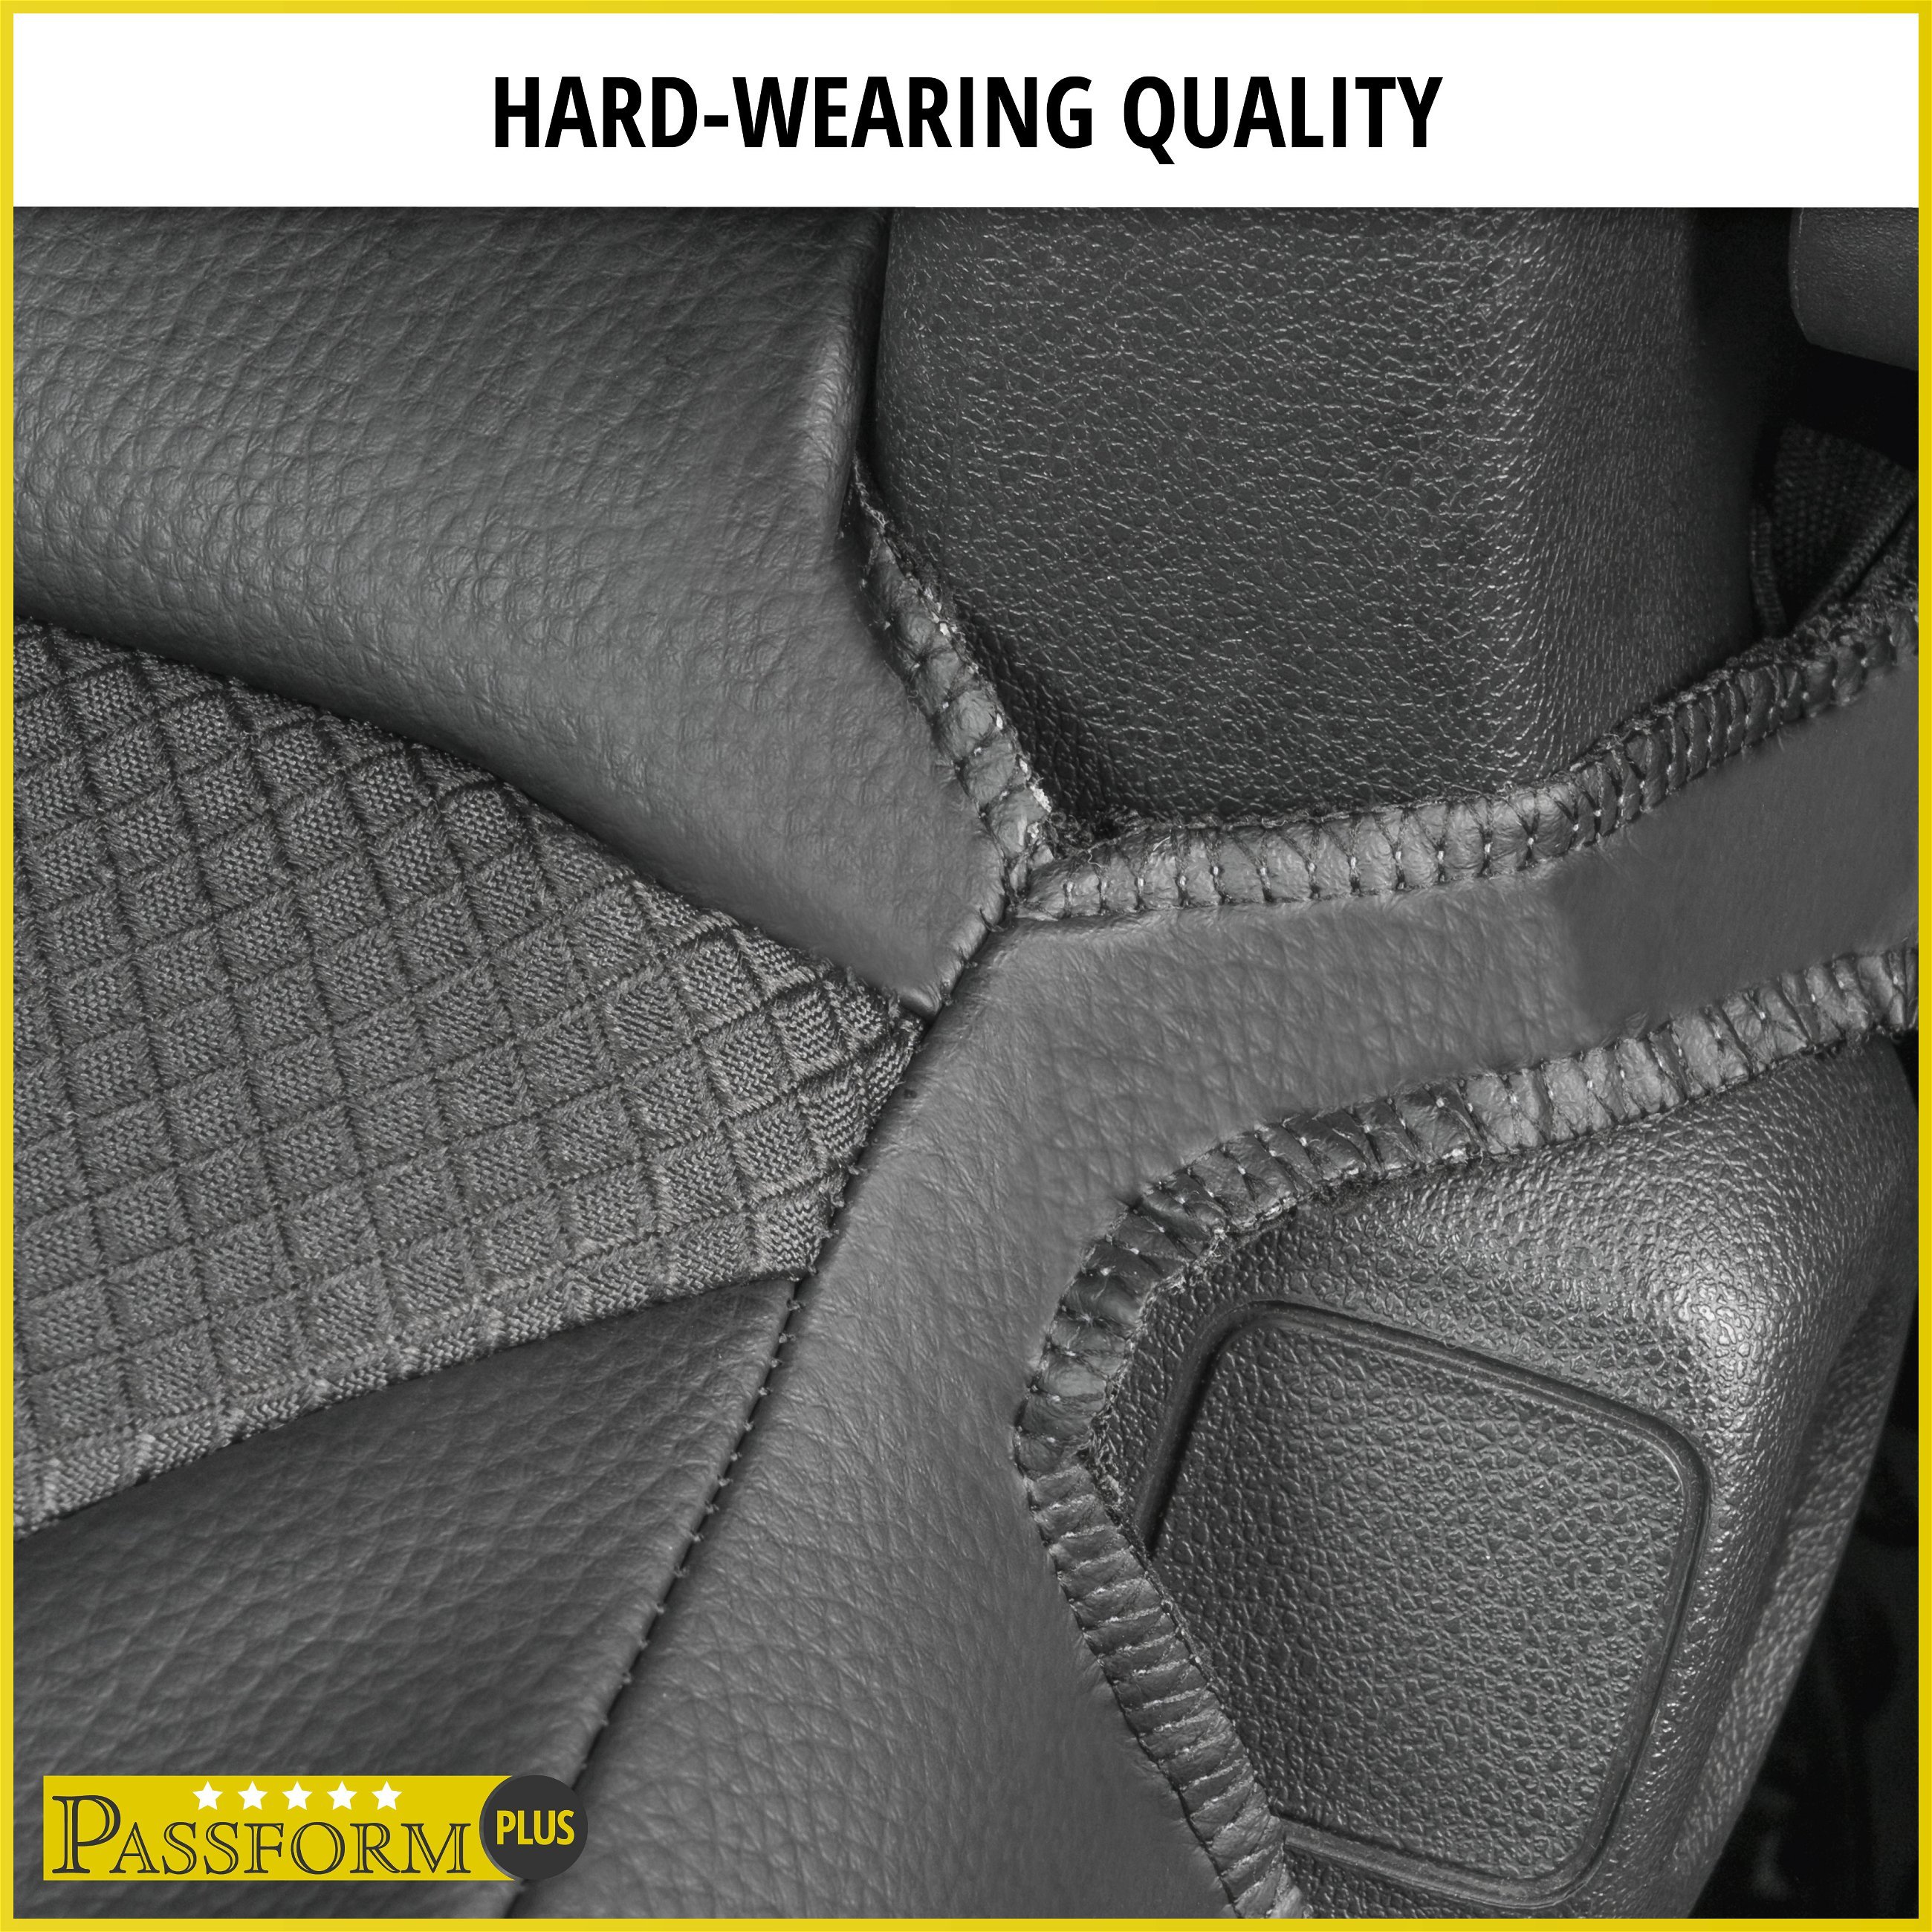 Premium Seat Cover for Renault Master III 02/2010-Today, 1 single seat cover front + armrest cover, 1 double bench cover